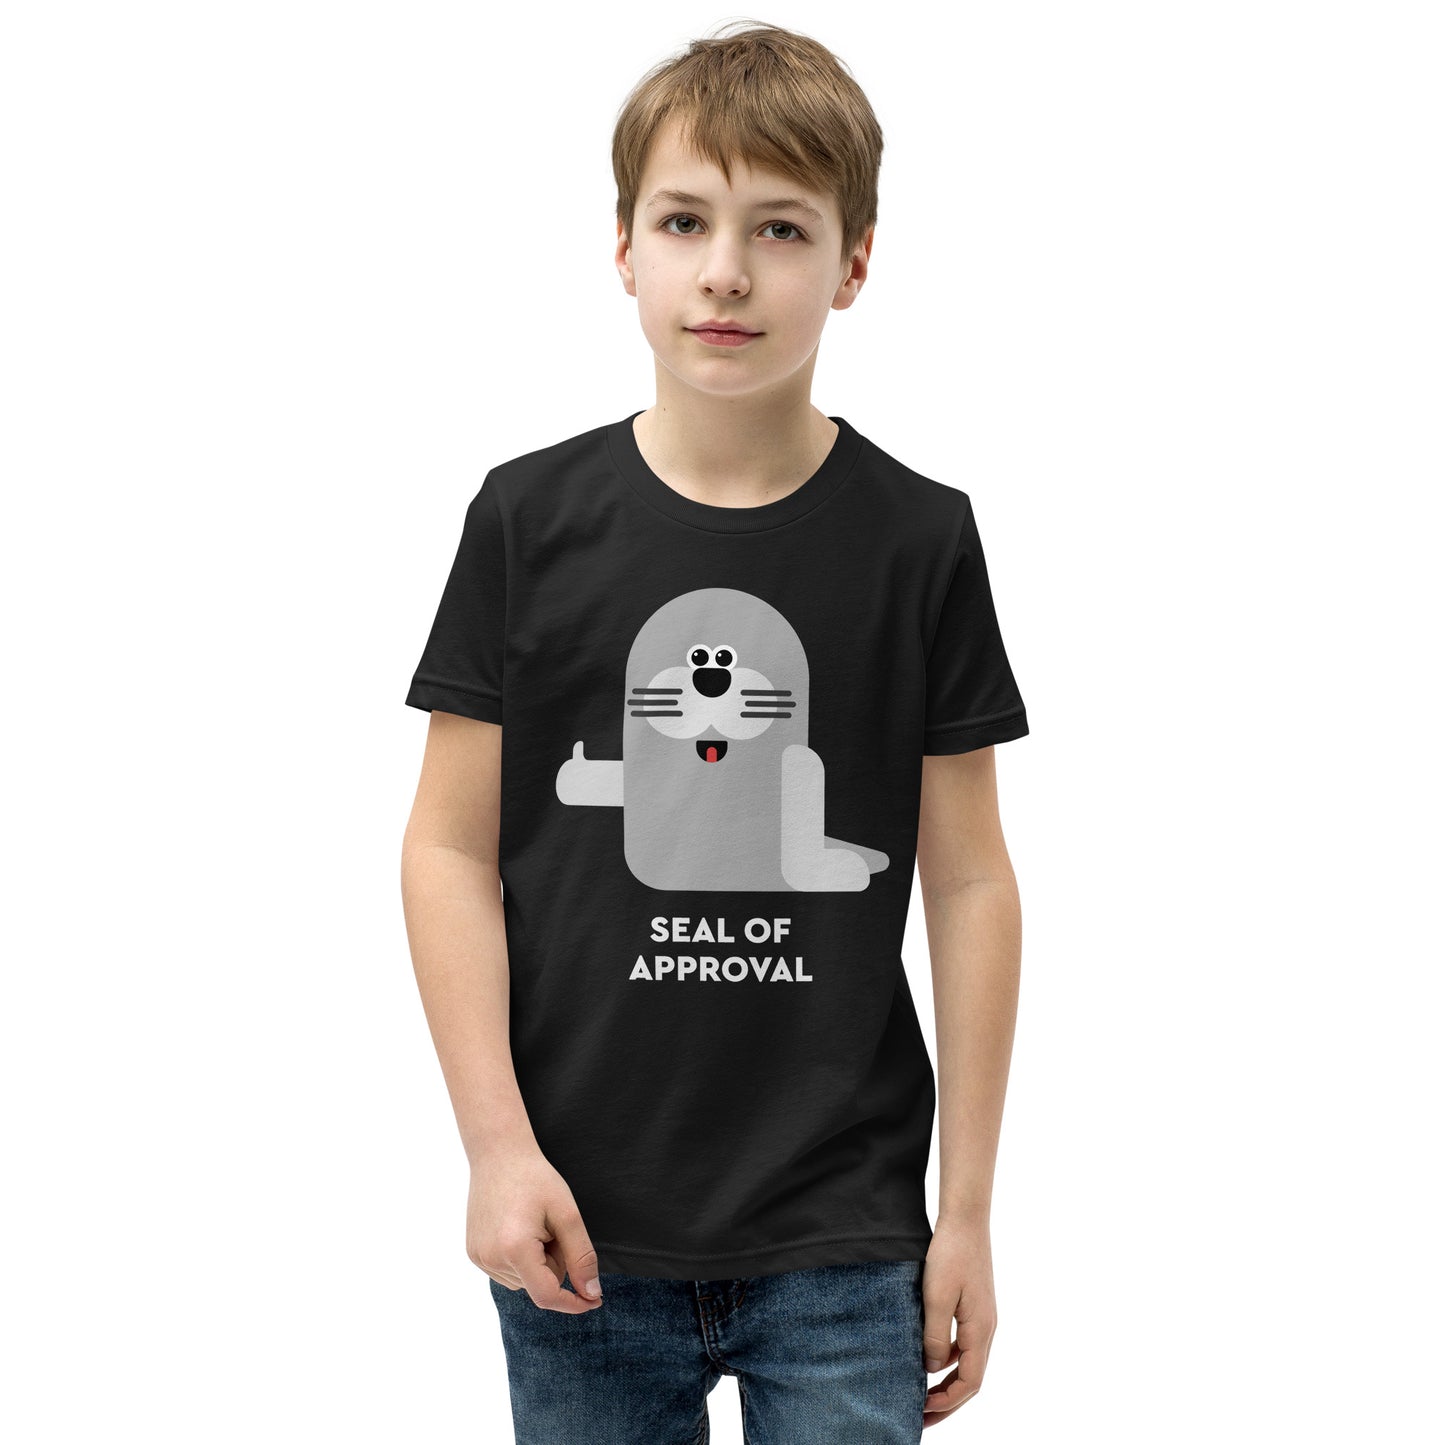 Kids - Seal of Approval - Short Sleeve T-Shirt